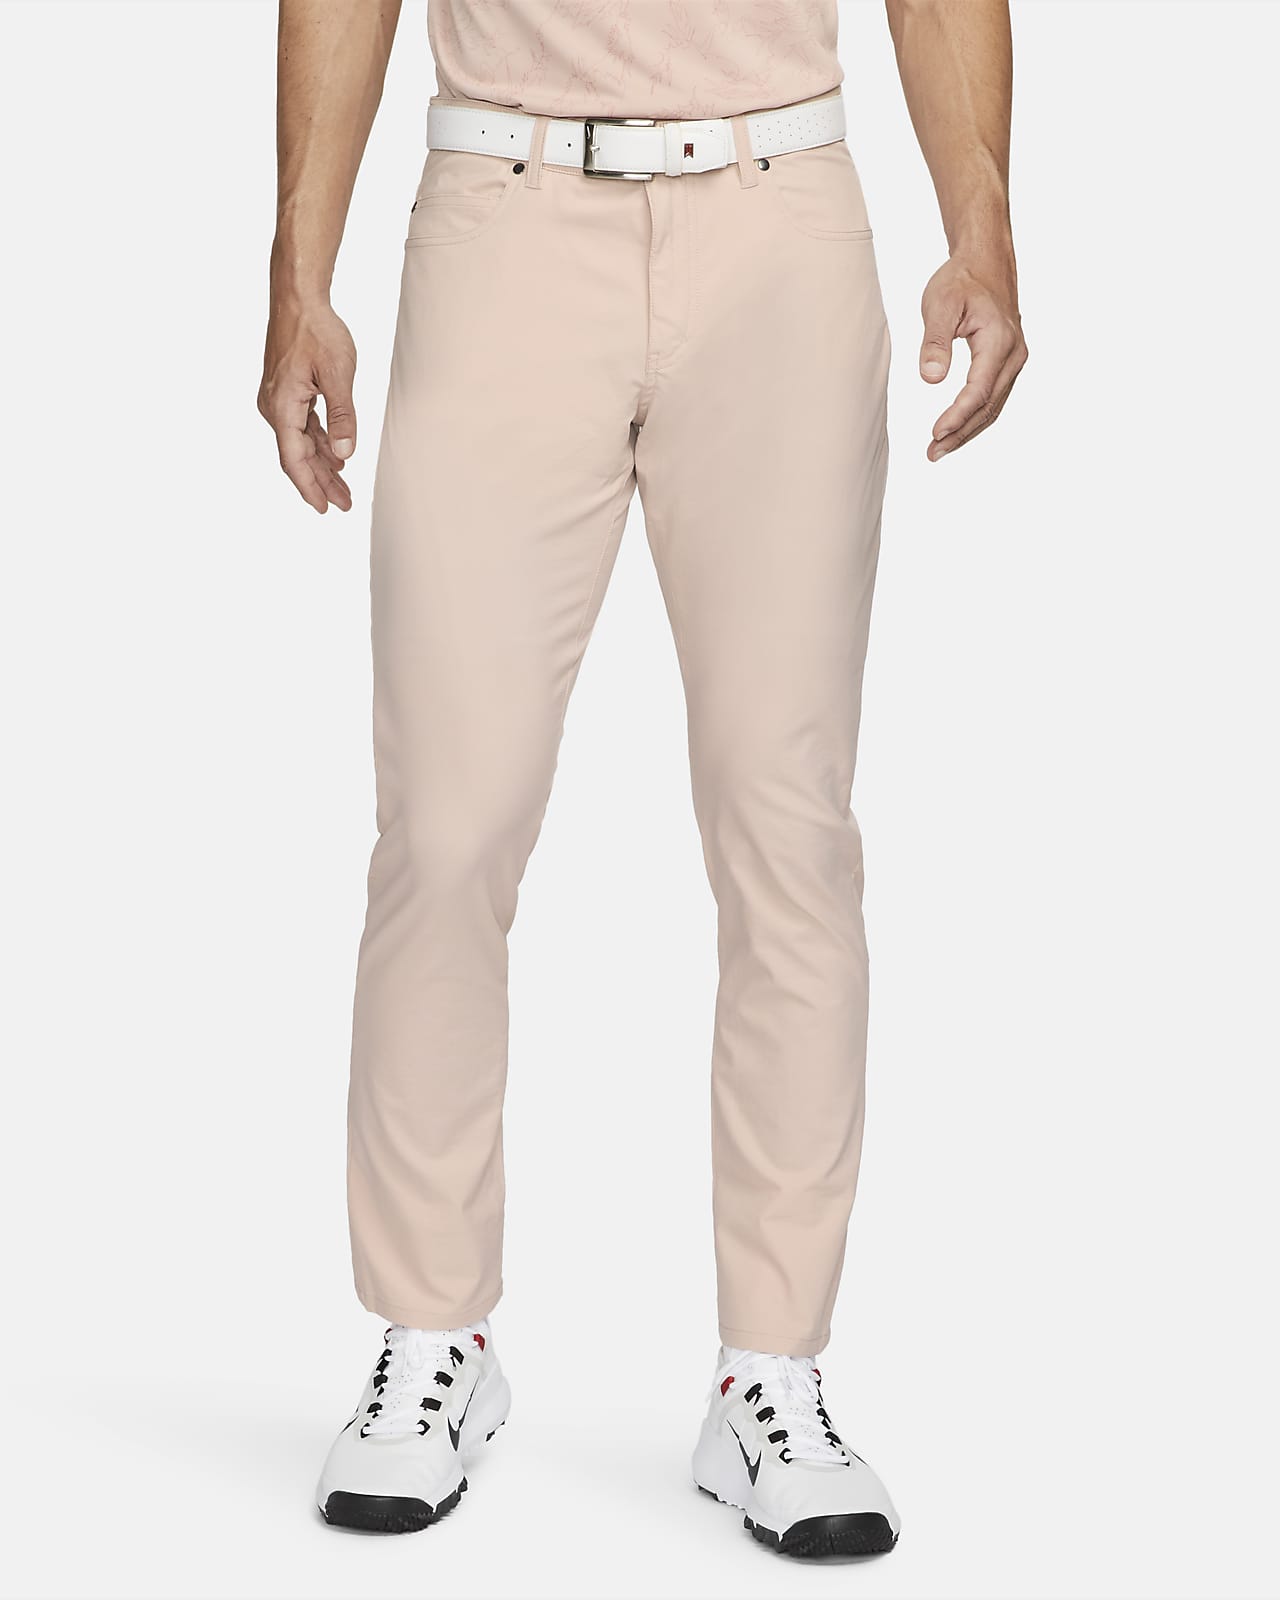 Aggregate more than 166 nike flat front pants super hot